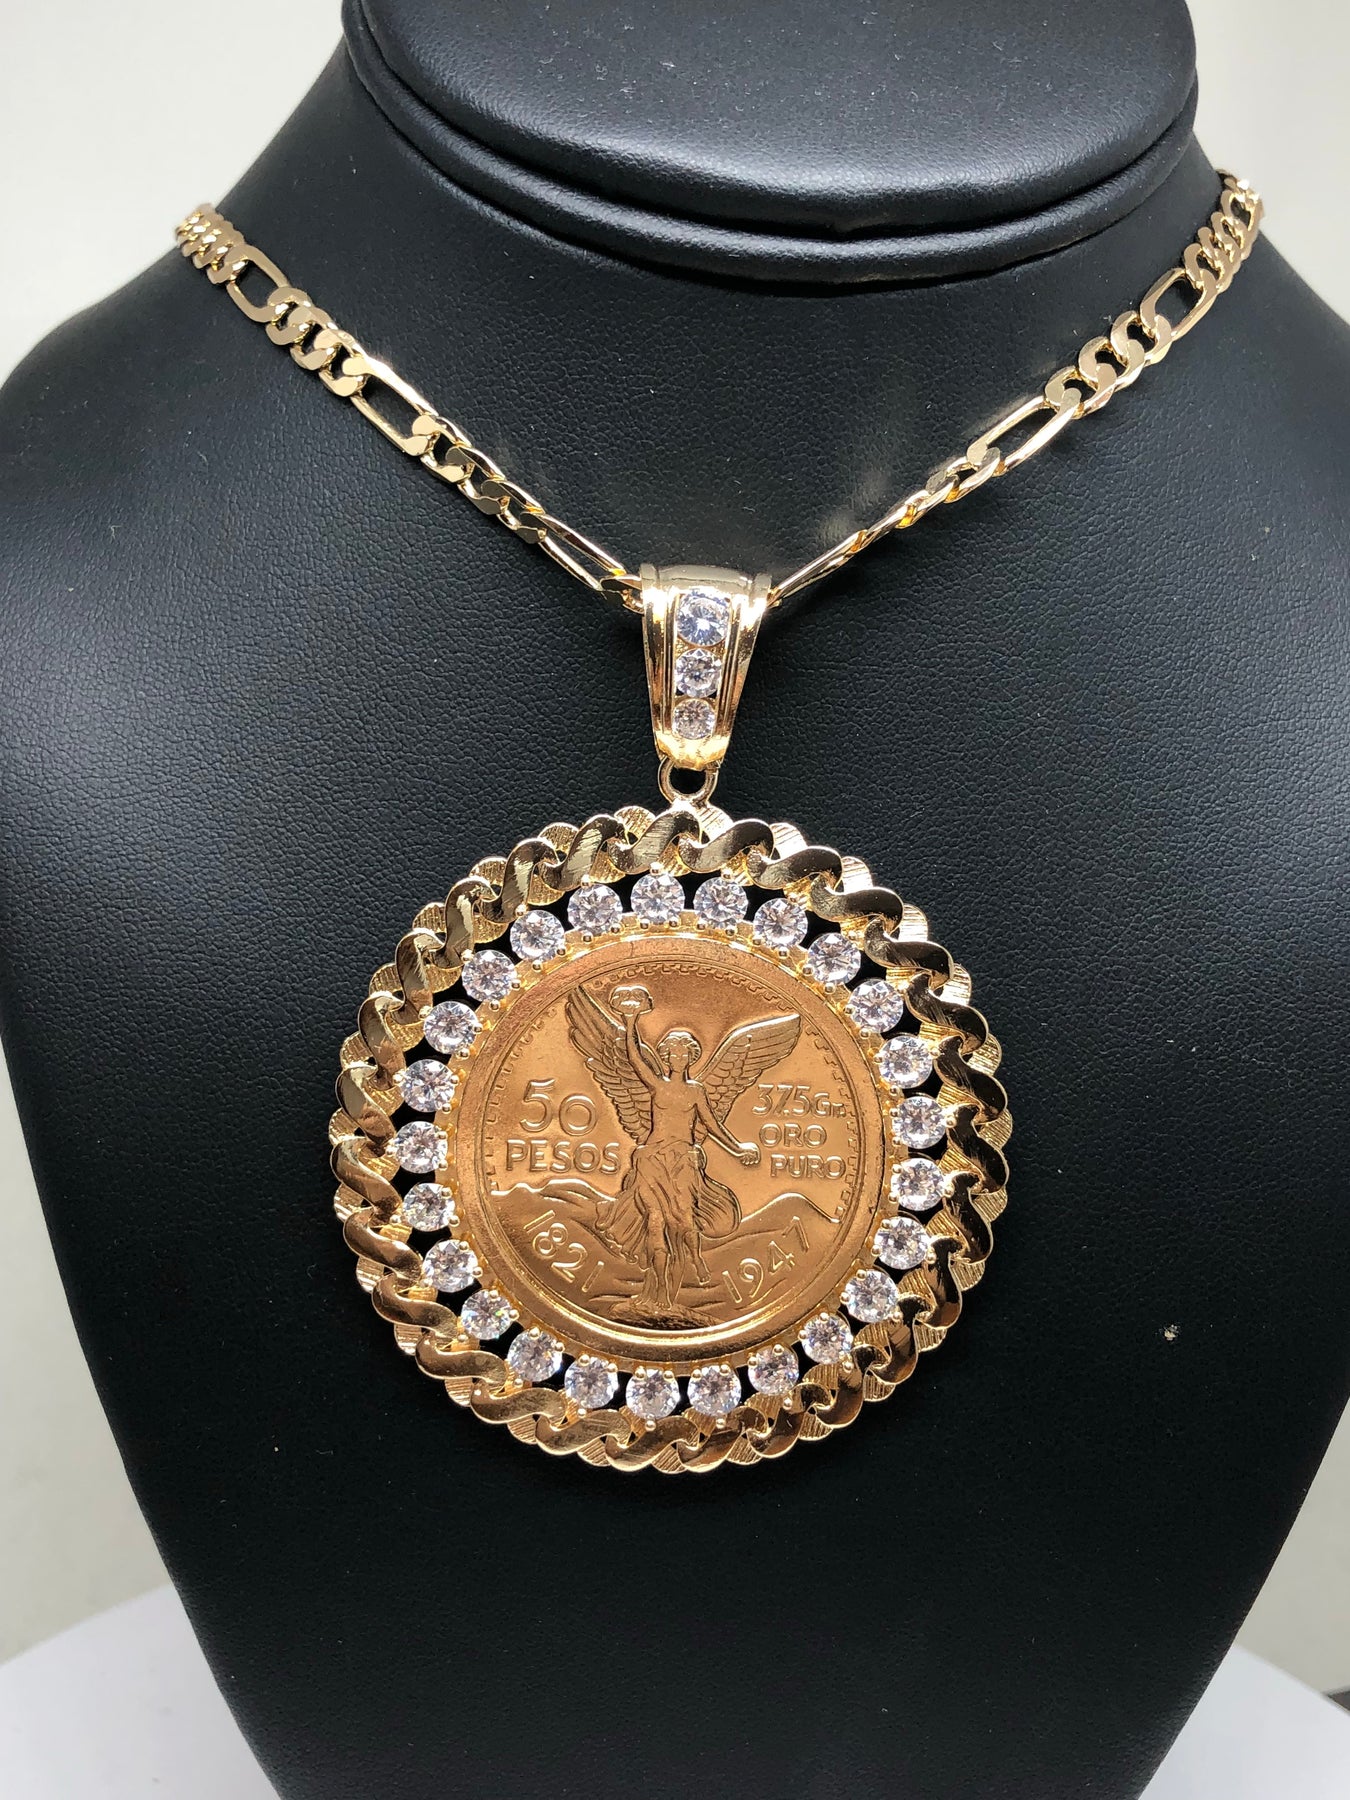 Centenario Gold Plated Coin Chain Pendants by Fran & Co. Jewelry